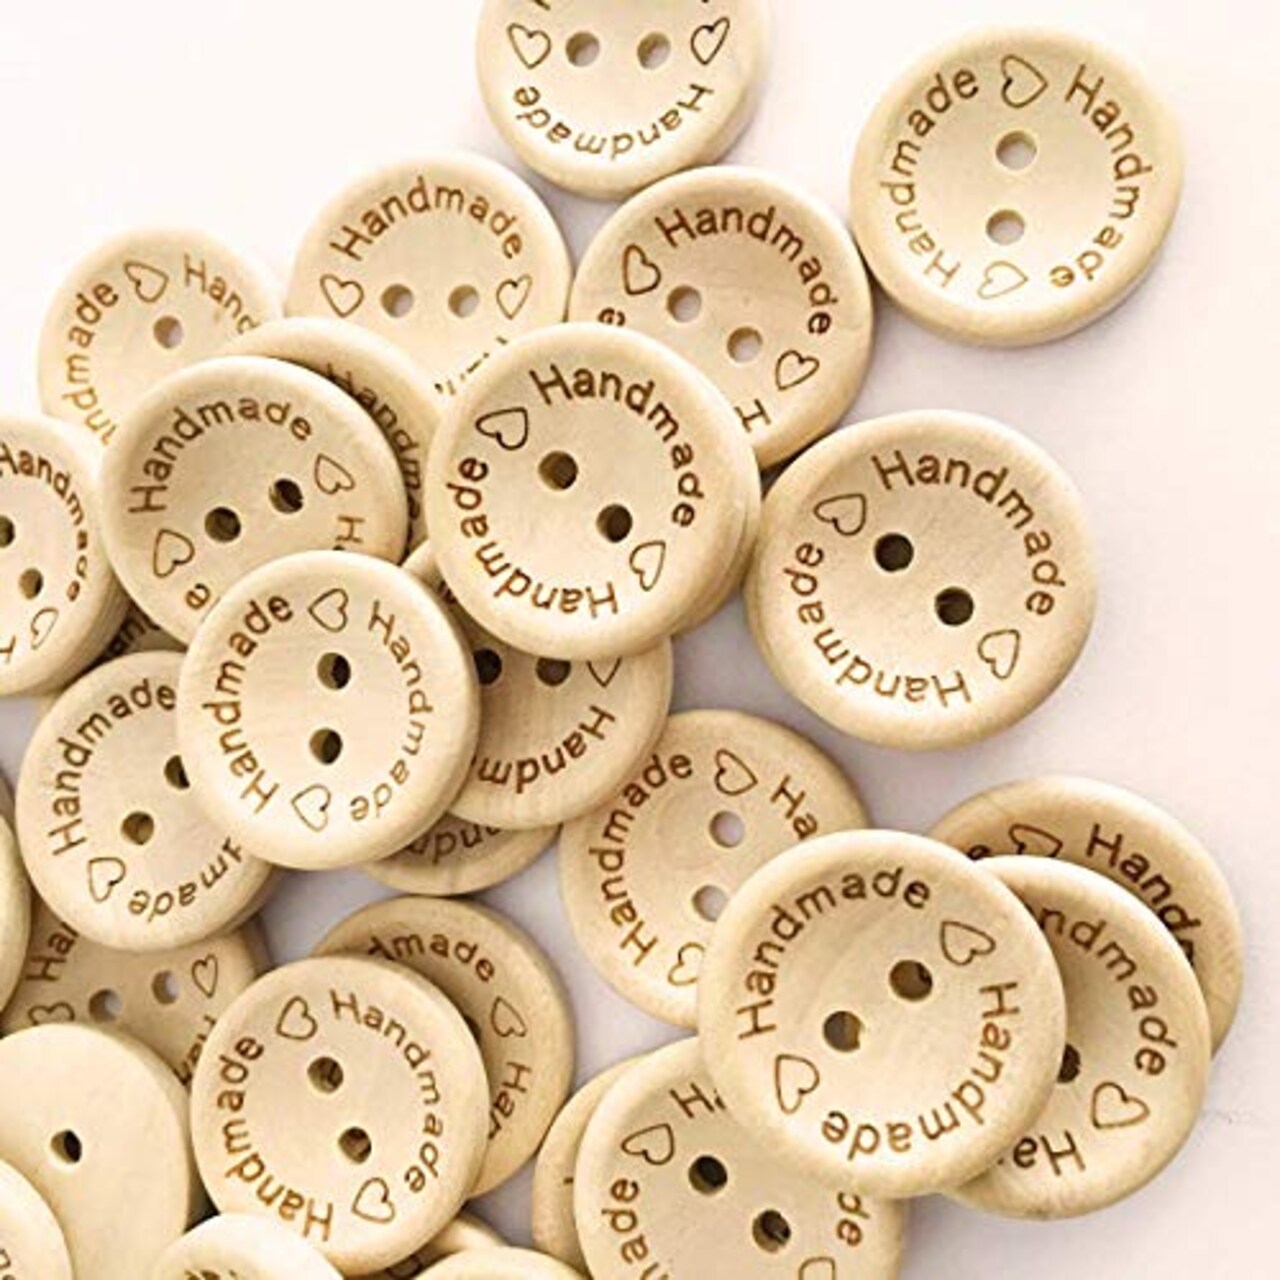 HengKe 100 pcs Wooden Handmade Buttons, Crafts Assorted Buttons Wooden Sewing  Buttons, for Sewing Clothing Accessories, DIY Crafting Projects Decorations  20mm